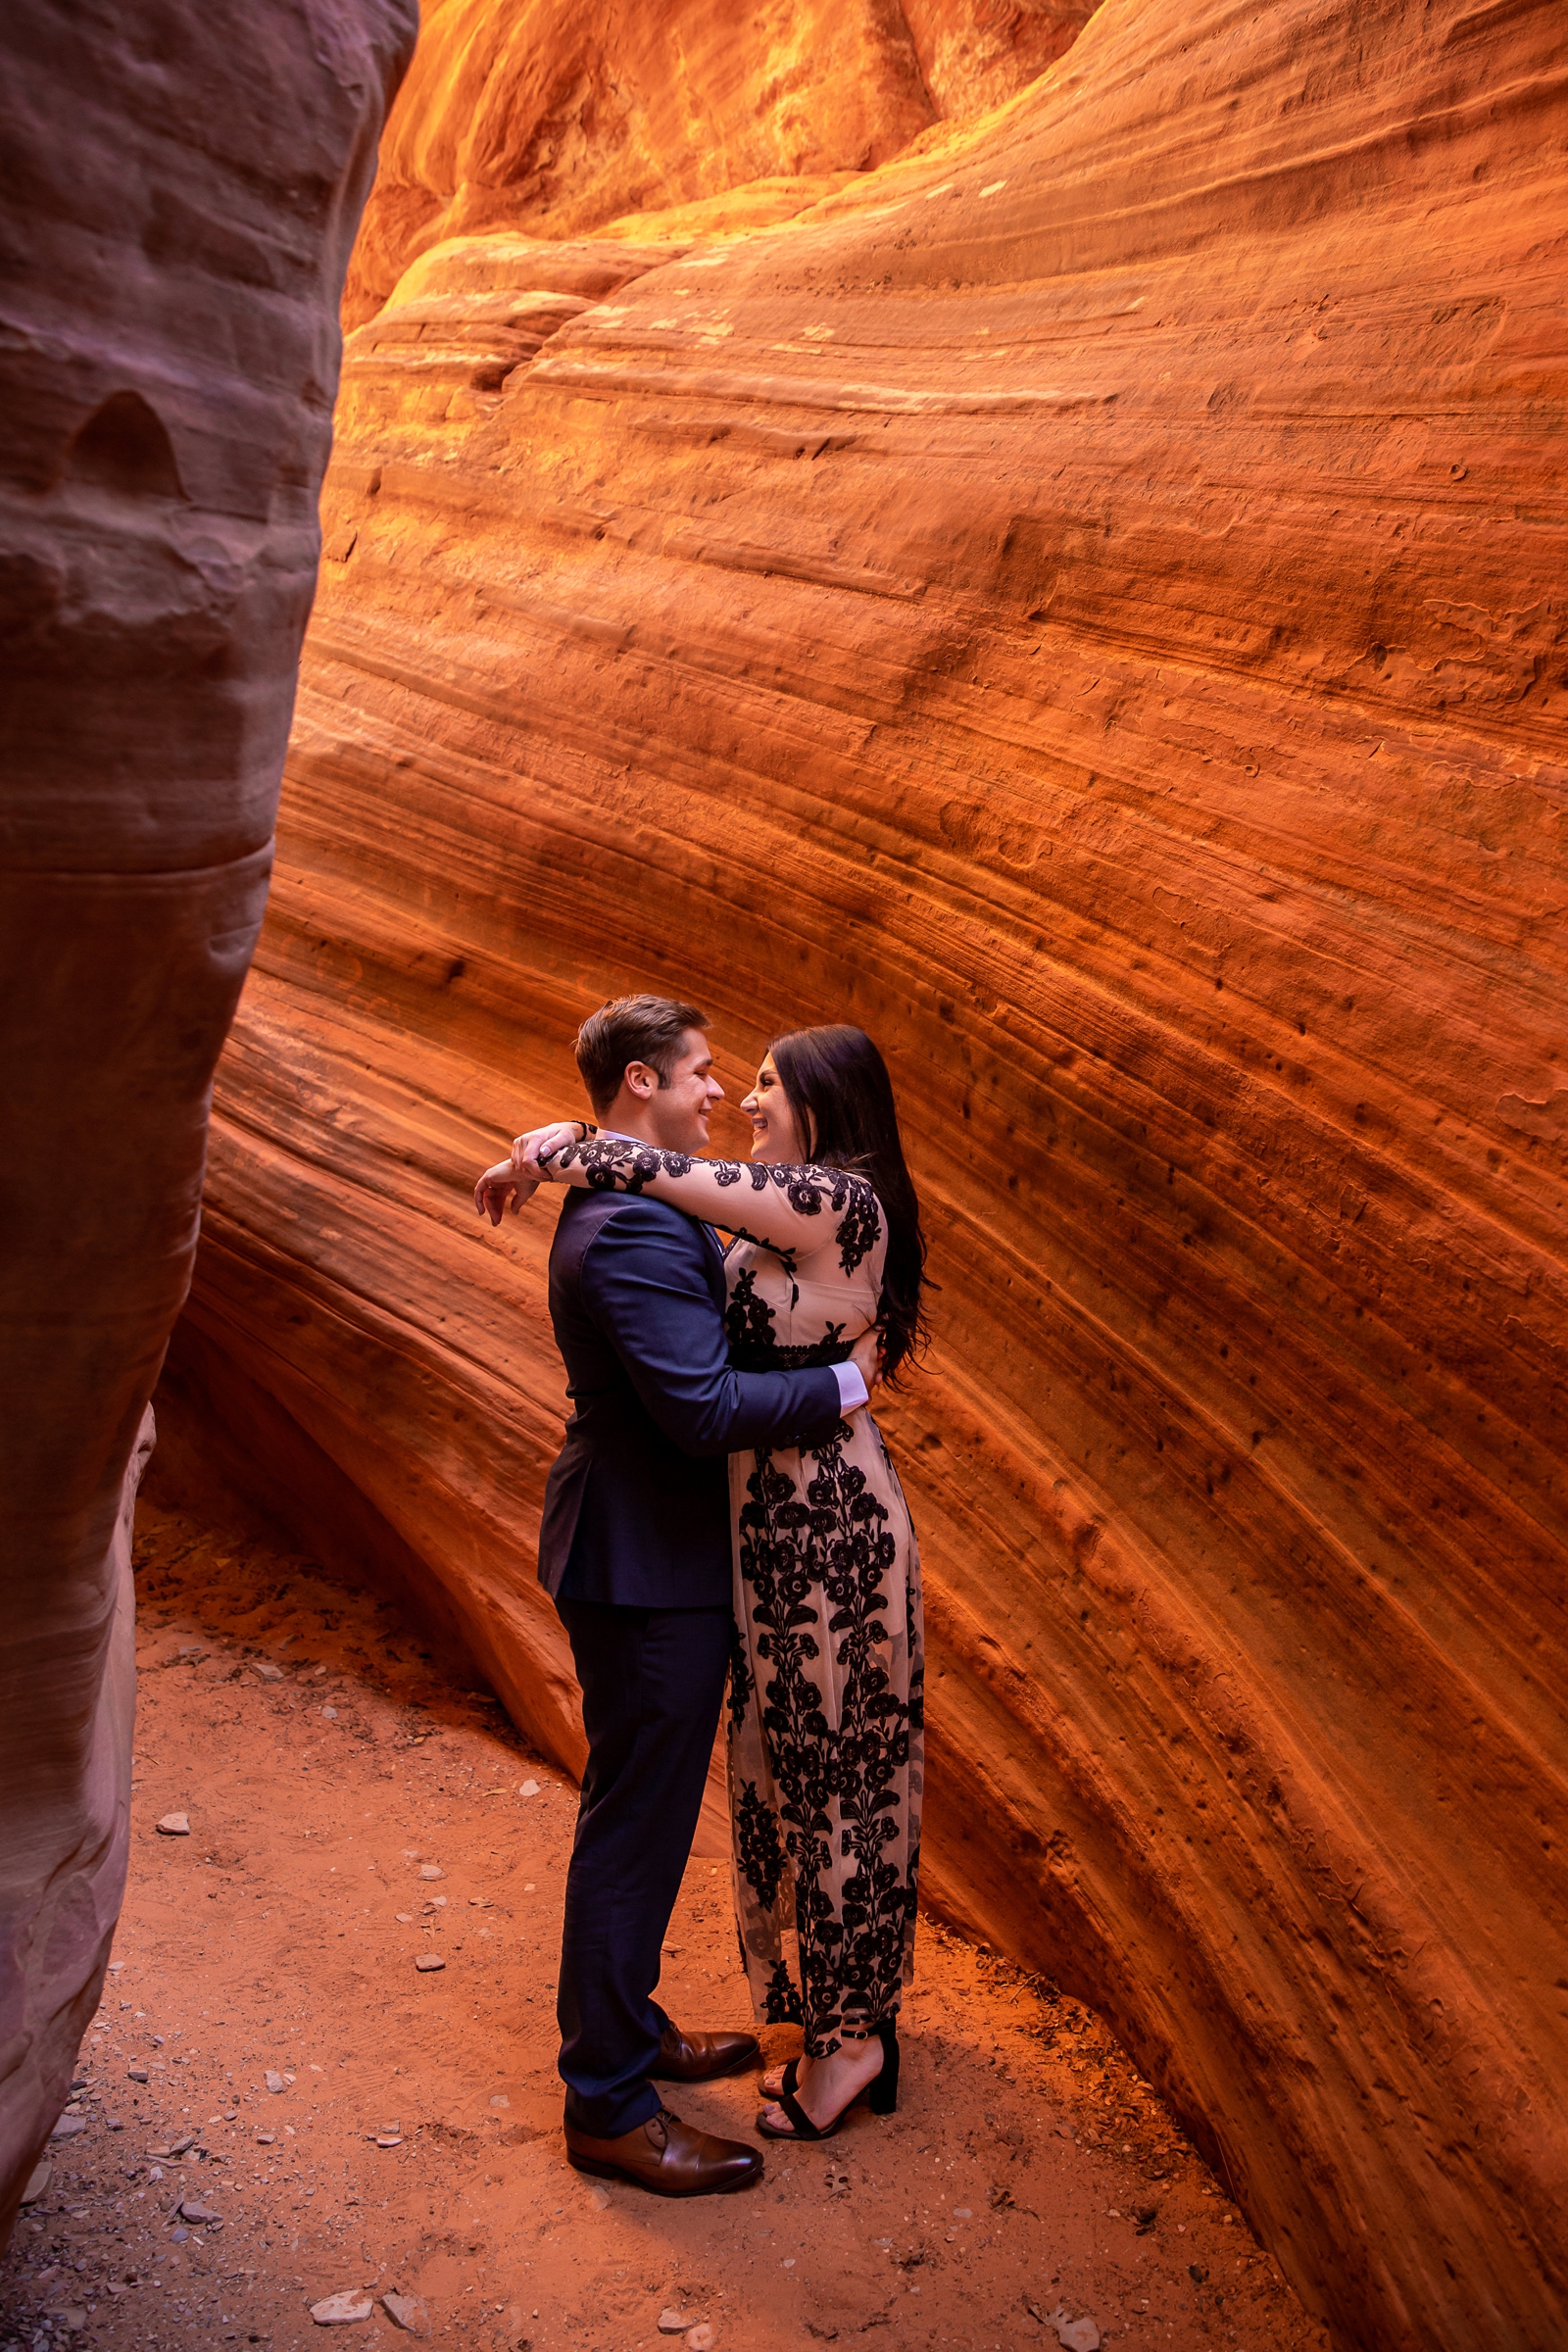 Couple in love in a glowing Utah slot canyon.